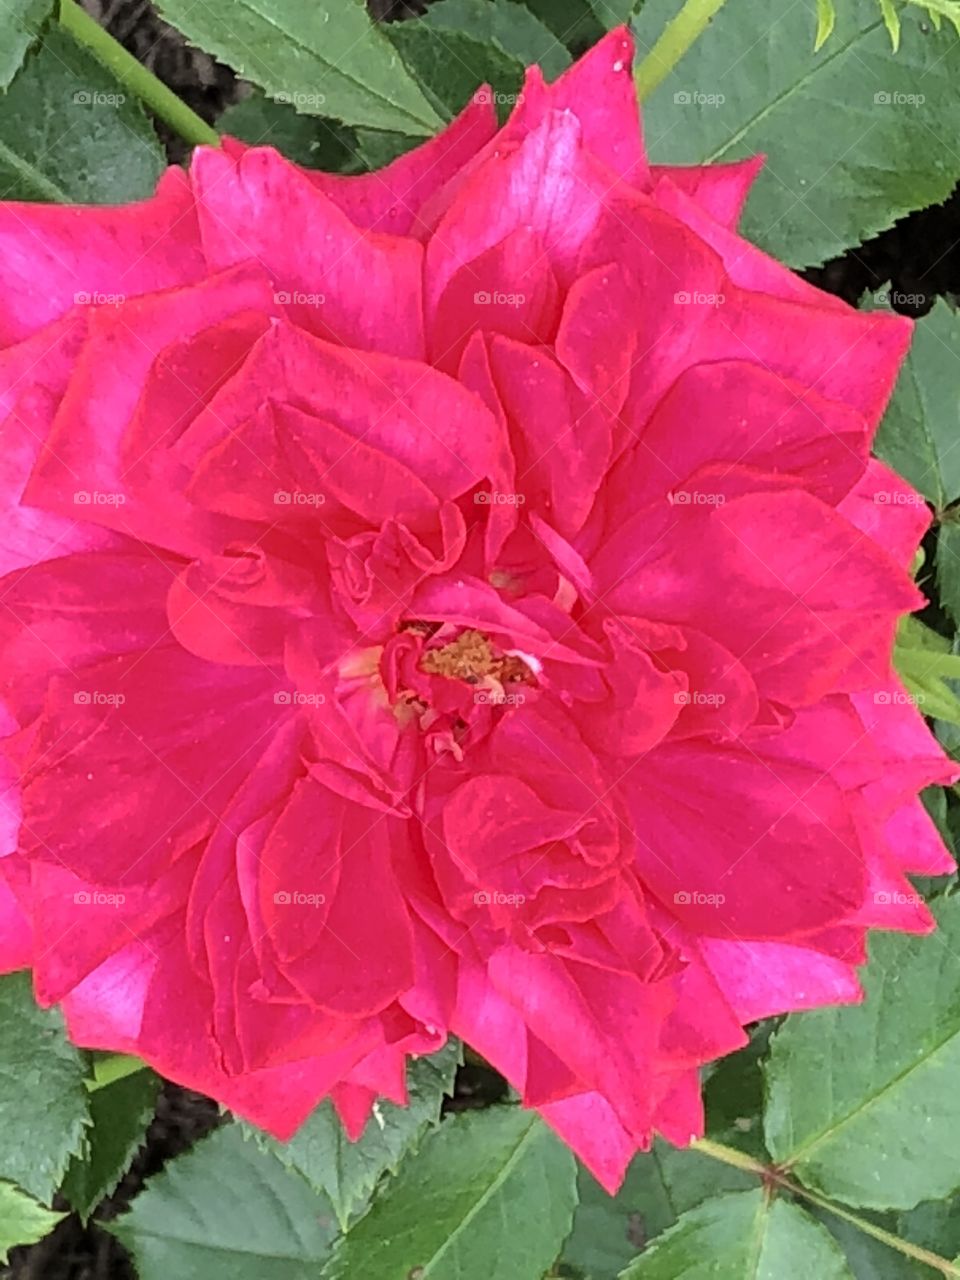 A stunning and vibrant pink flower. Picture taken at the rose garden in Colonial Park in Somerset, NJ. 